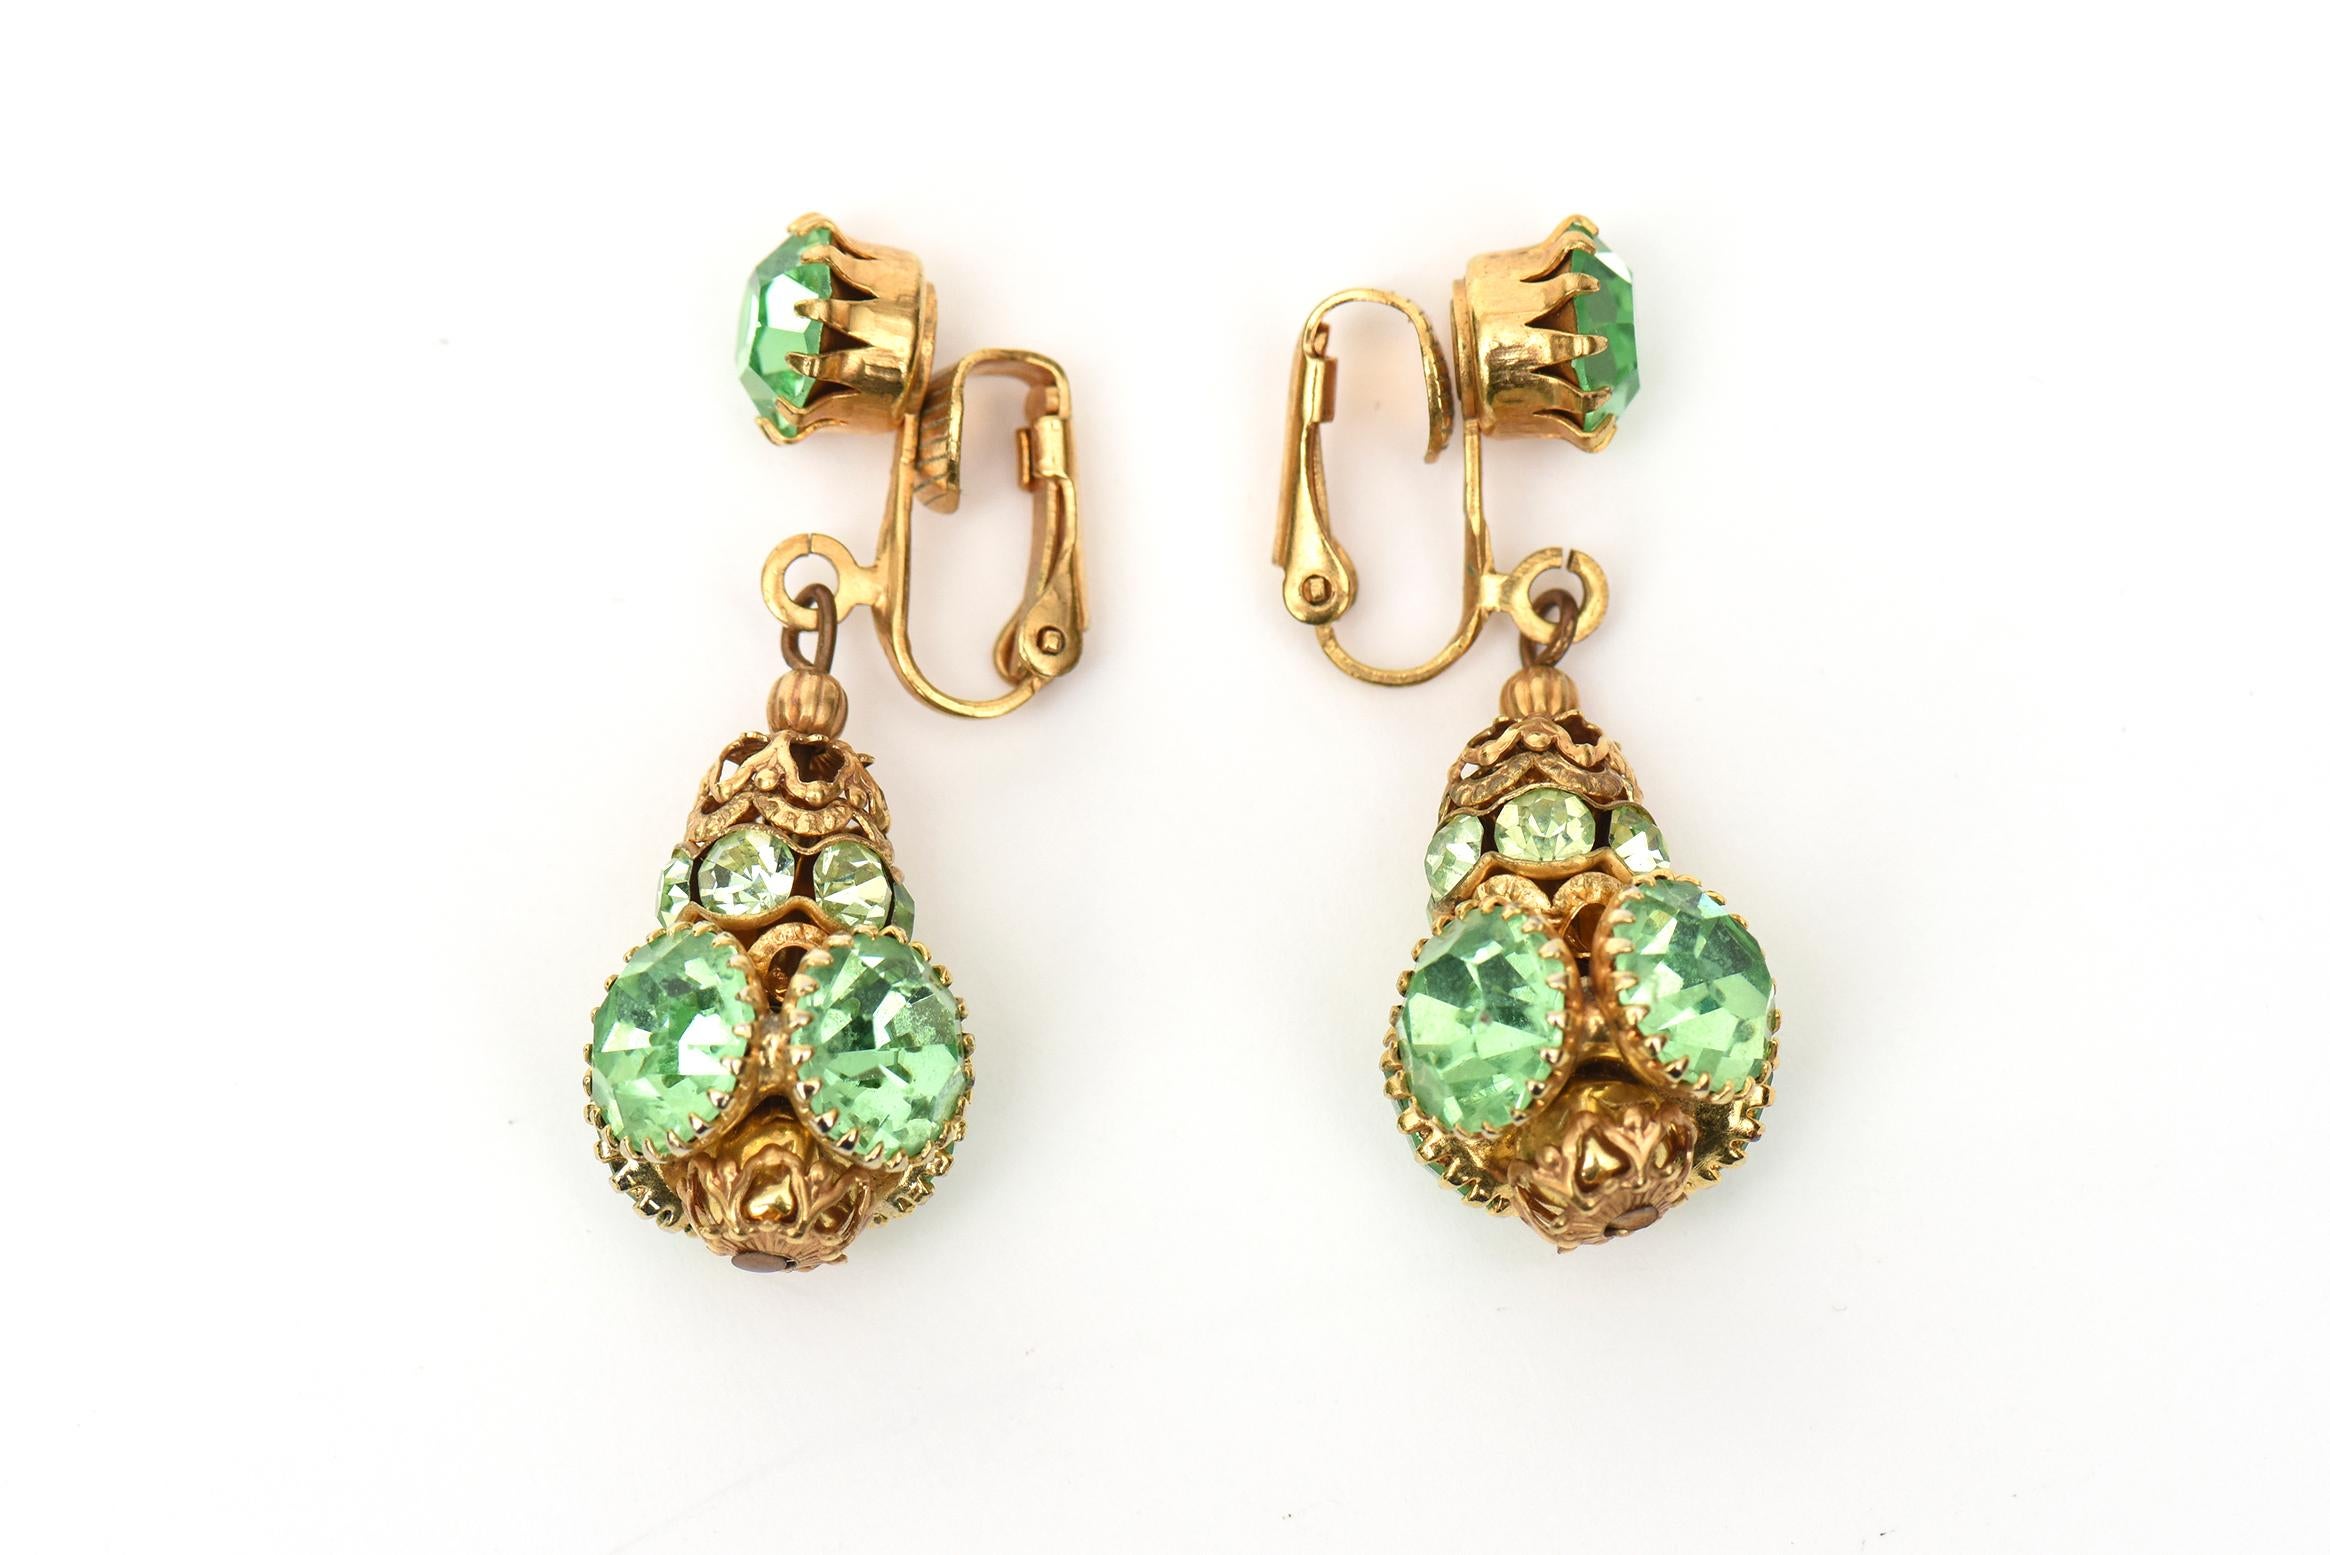 These lovely pair of dangle clip on earrings from the 90's are a gorgeous shade of light green against the gold. They are by Frank Hess of the Miriam Haskell collection and are the the newer unsigned pieces. Perfect for summer, cruise or resort